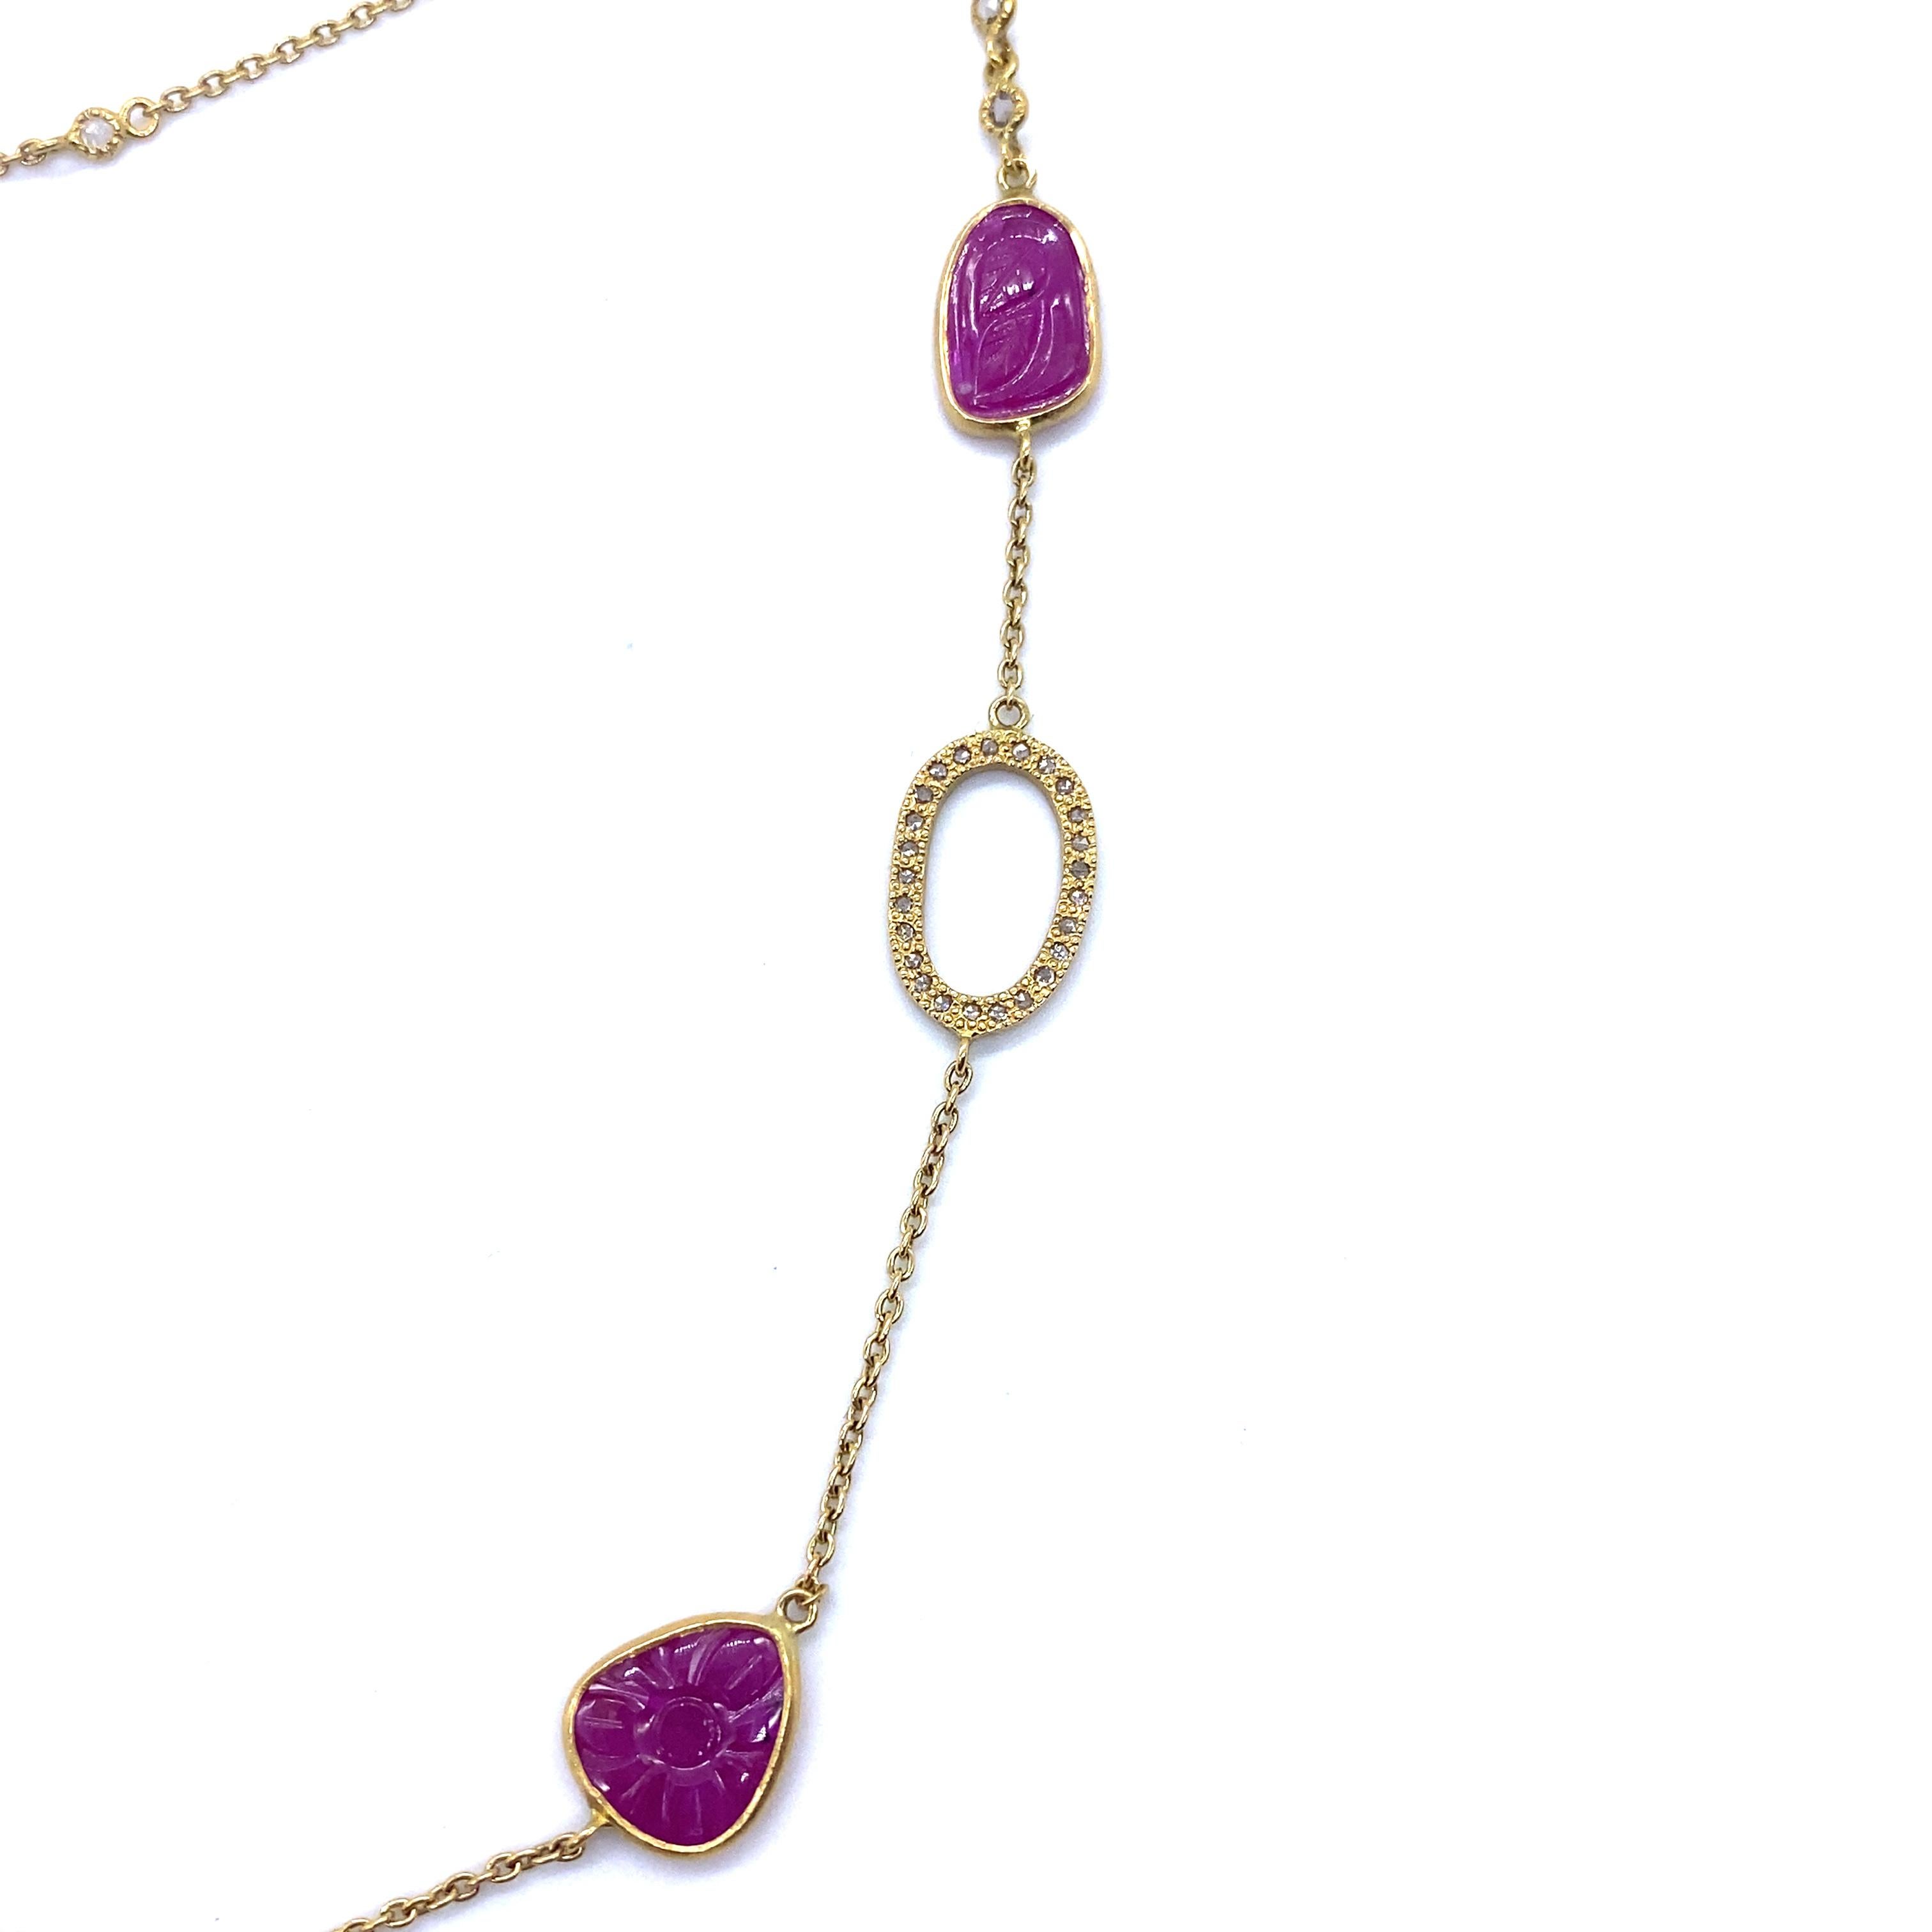 Vintage Affinity Necklace Set in 20 Karat Yellow Gold with 34.30 Carat Carved Ruby and 1.26 Carat Rose-Cut Diamonds. This One-Of-A-Kind Necklace Features Carved Rubies and Rose-Cut Diamonds Set With A Yellow Gold Chain.